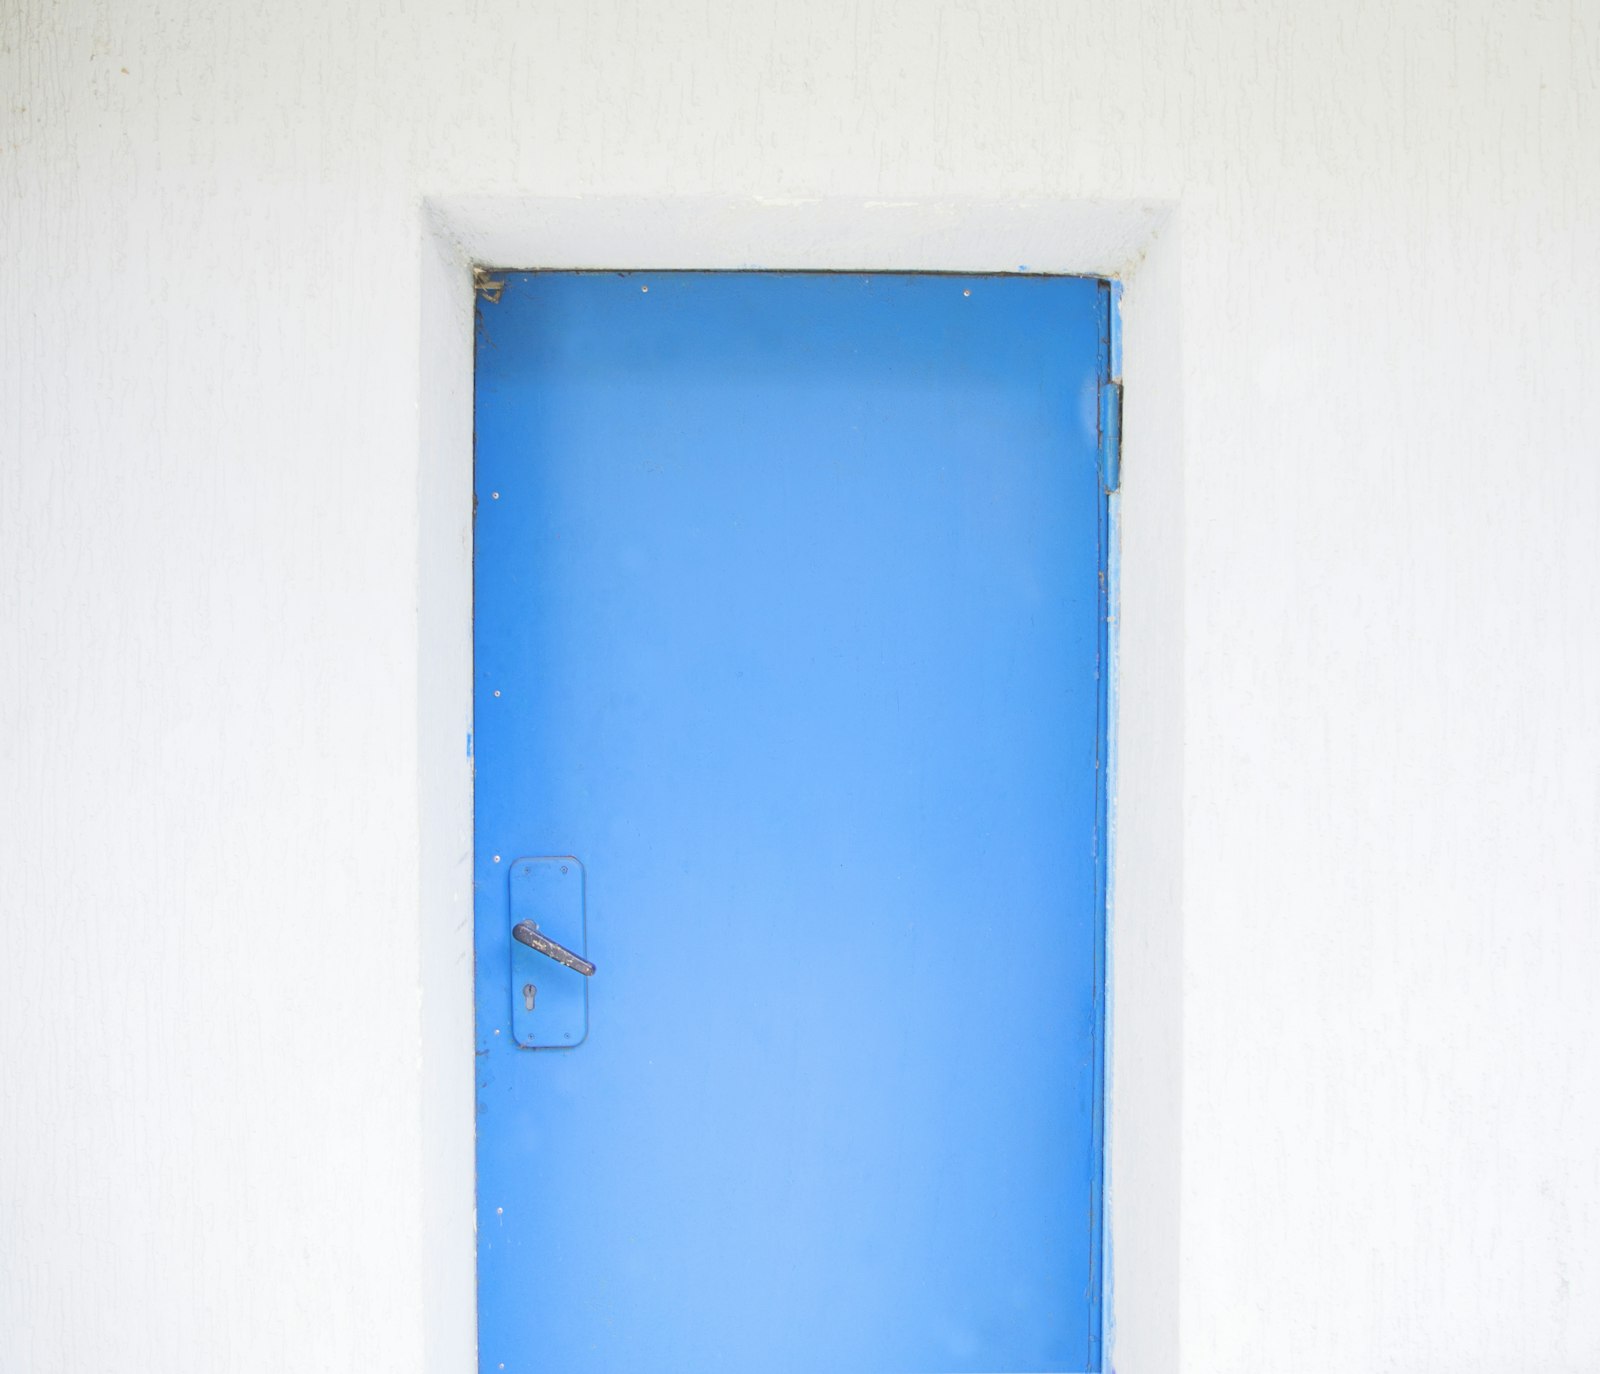 Pentax K-01 sample photo. Closed blue painted door photography